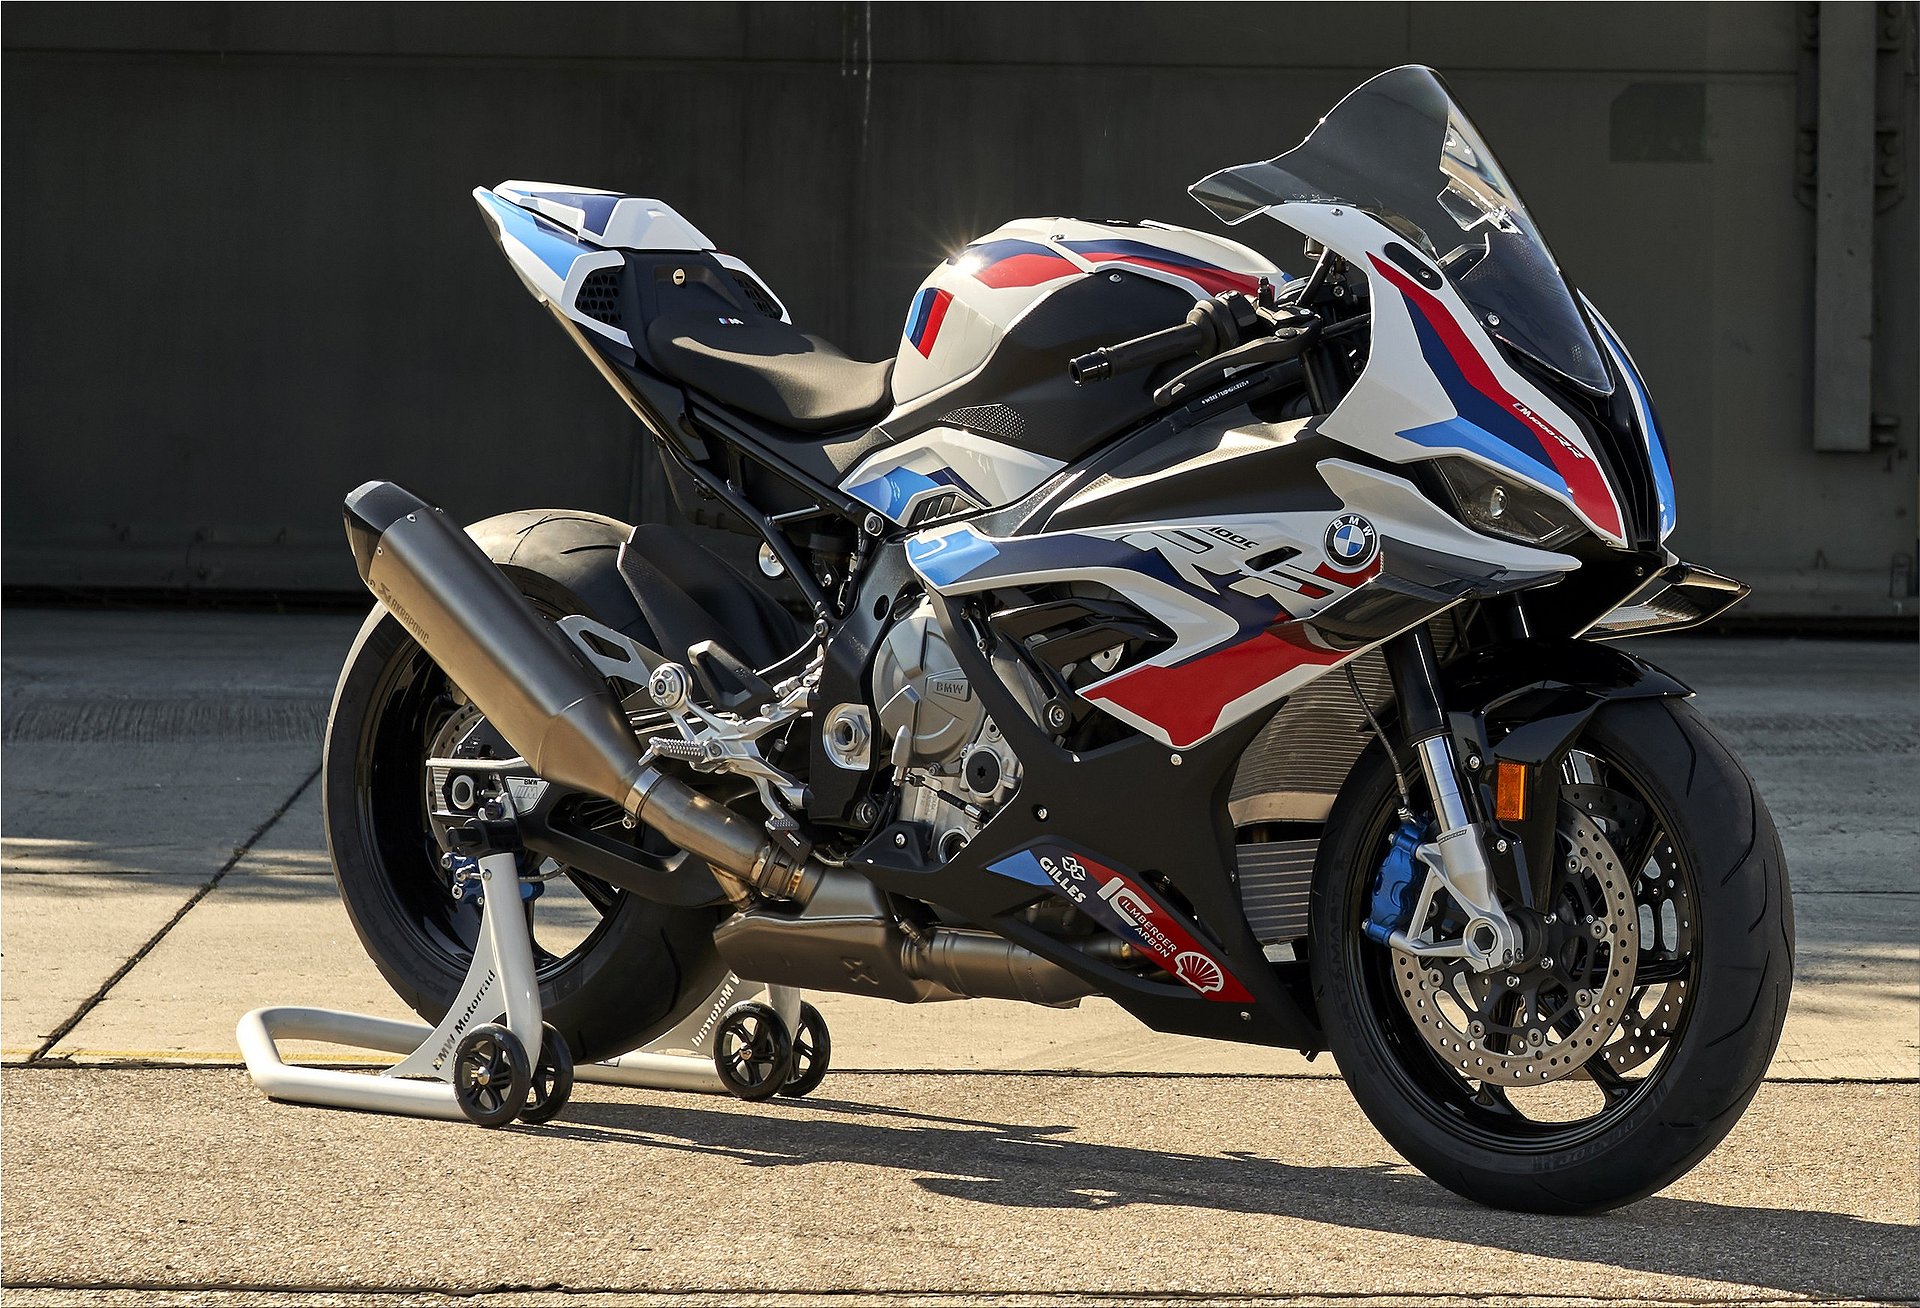 The new BMW M 1000 RR with 212Hp from 44,990 euro Spare